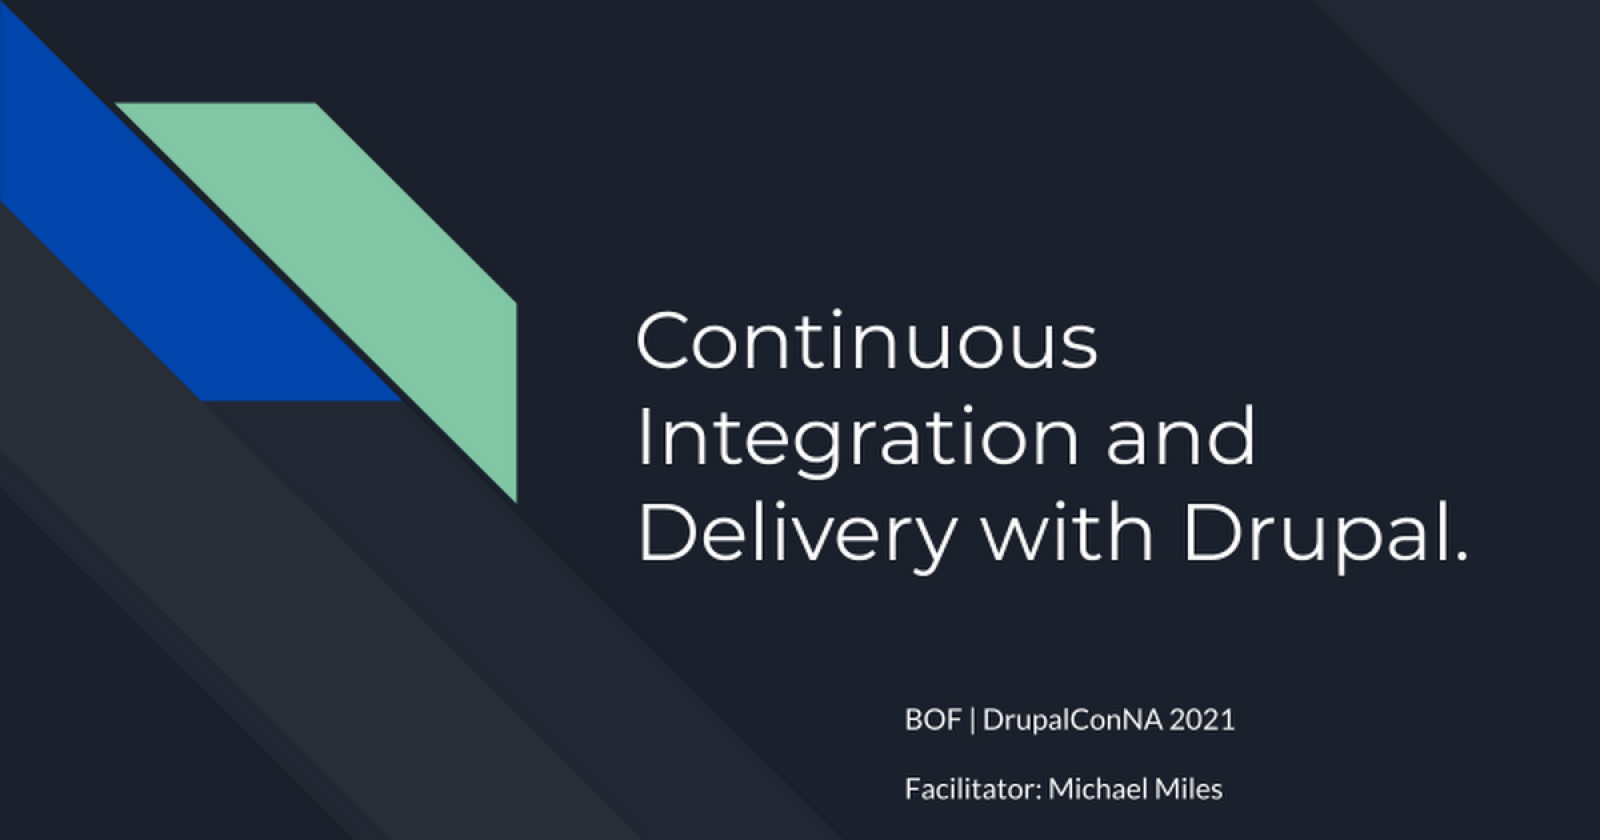 Continuous integration and delivery with Drupal.